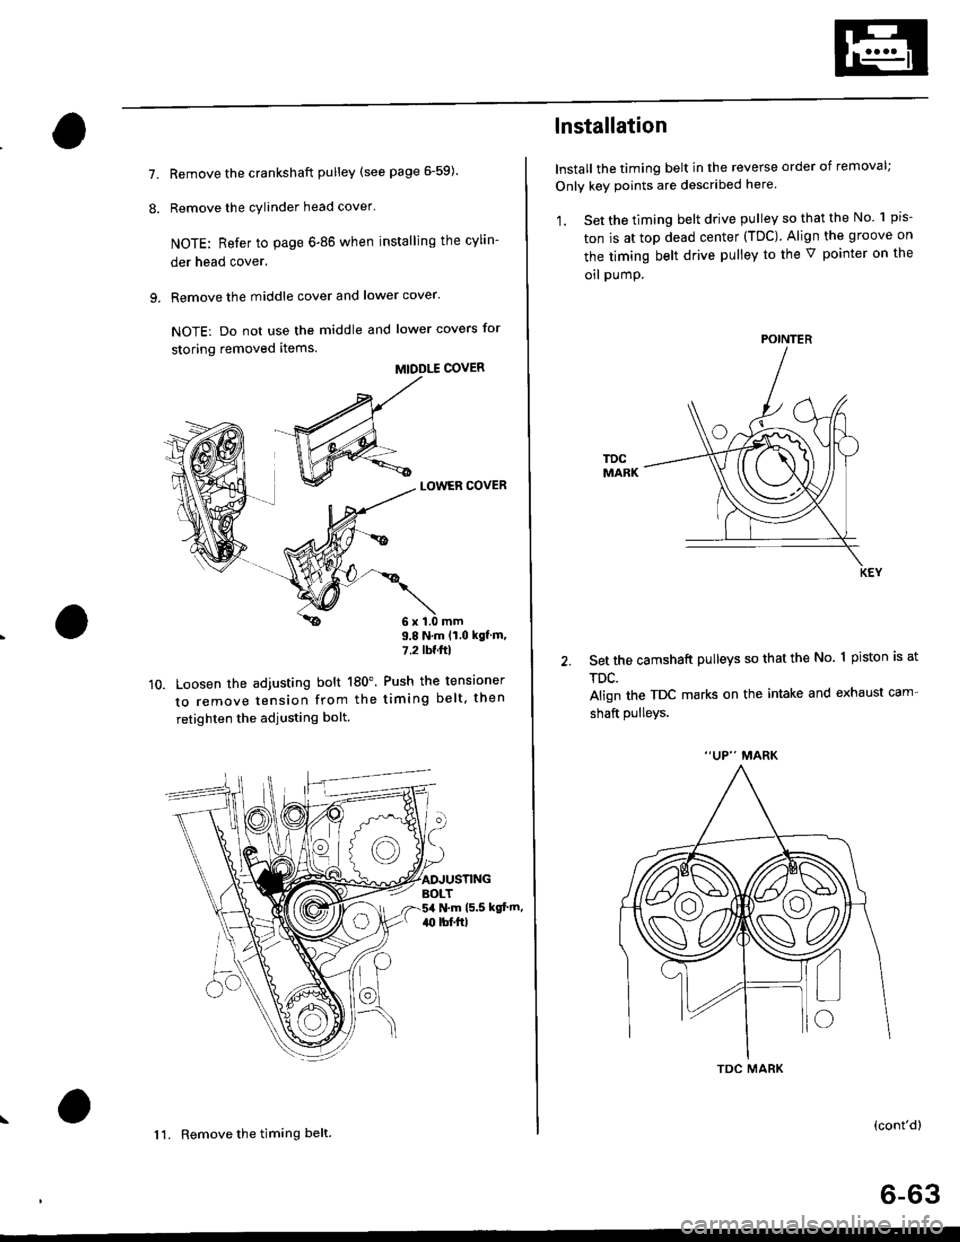 HONDA CIVIC 1998 6.G Owners Manual 7.
8.
Remove the crankshaft pulley (see page 6-59).
Remove the cylinder head cover
NOTE: Refer to page 6-86 when installing the cylin-
der head cover.
Remove the middle cover and lower cover.
NOTE: D